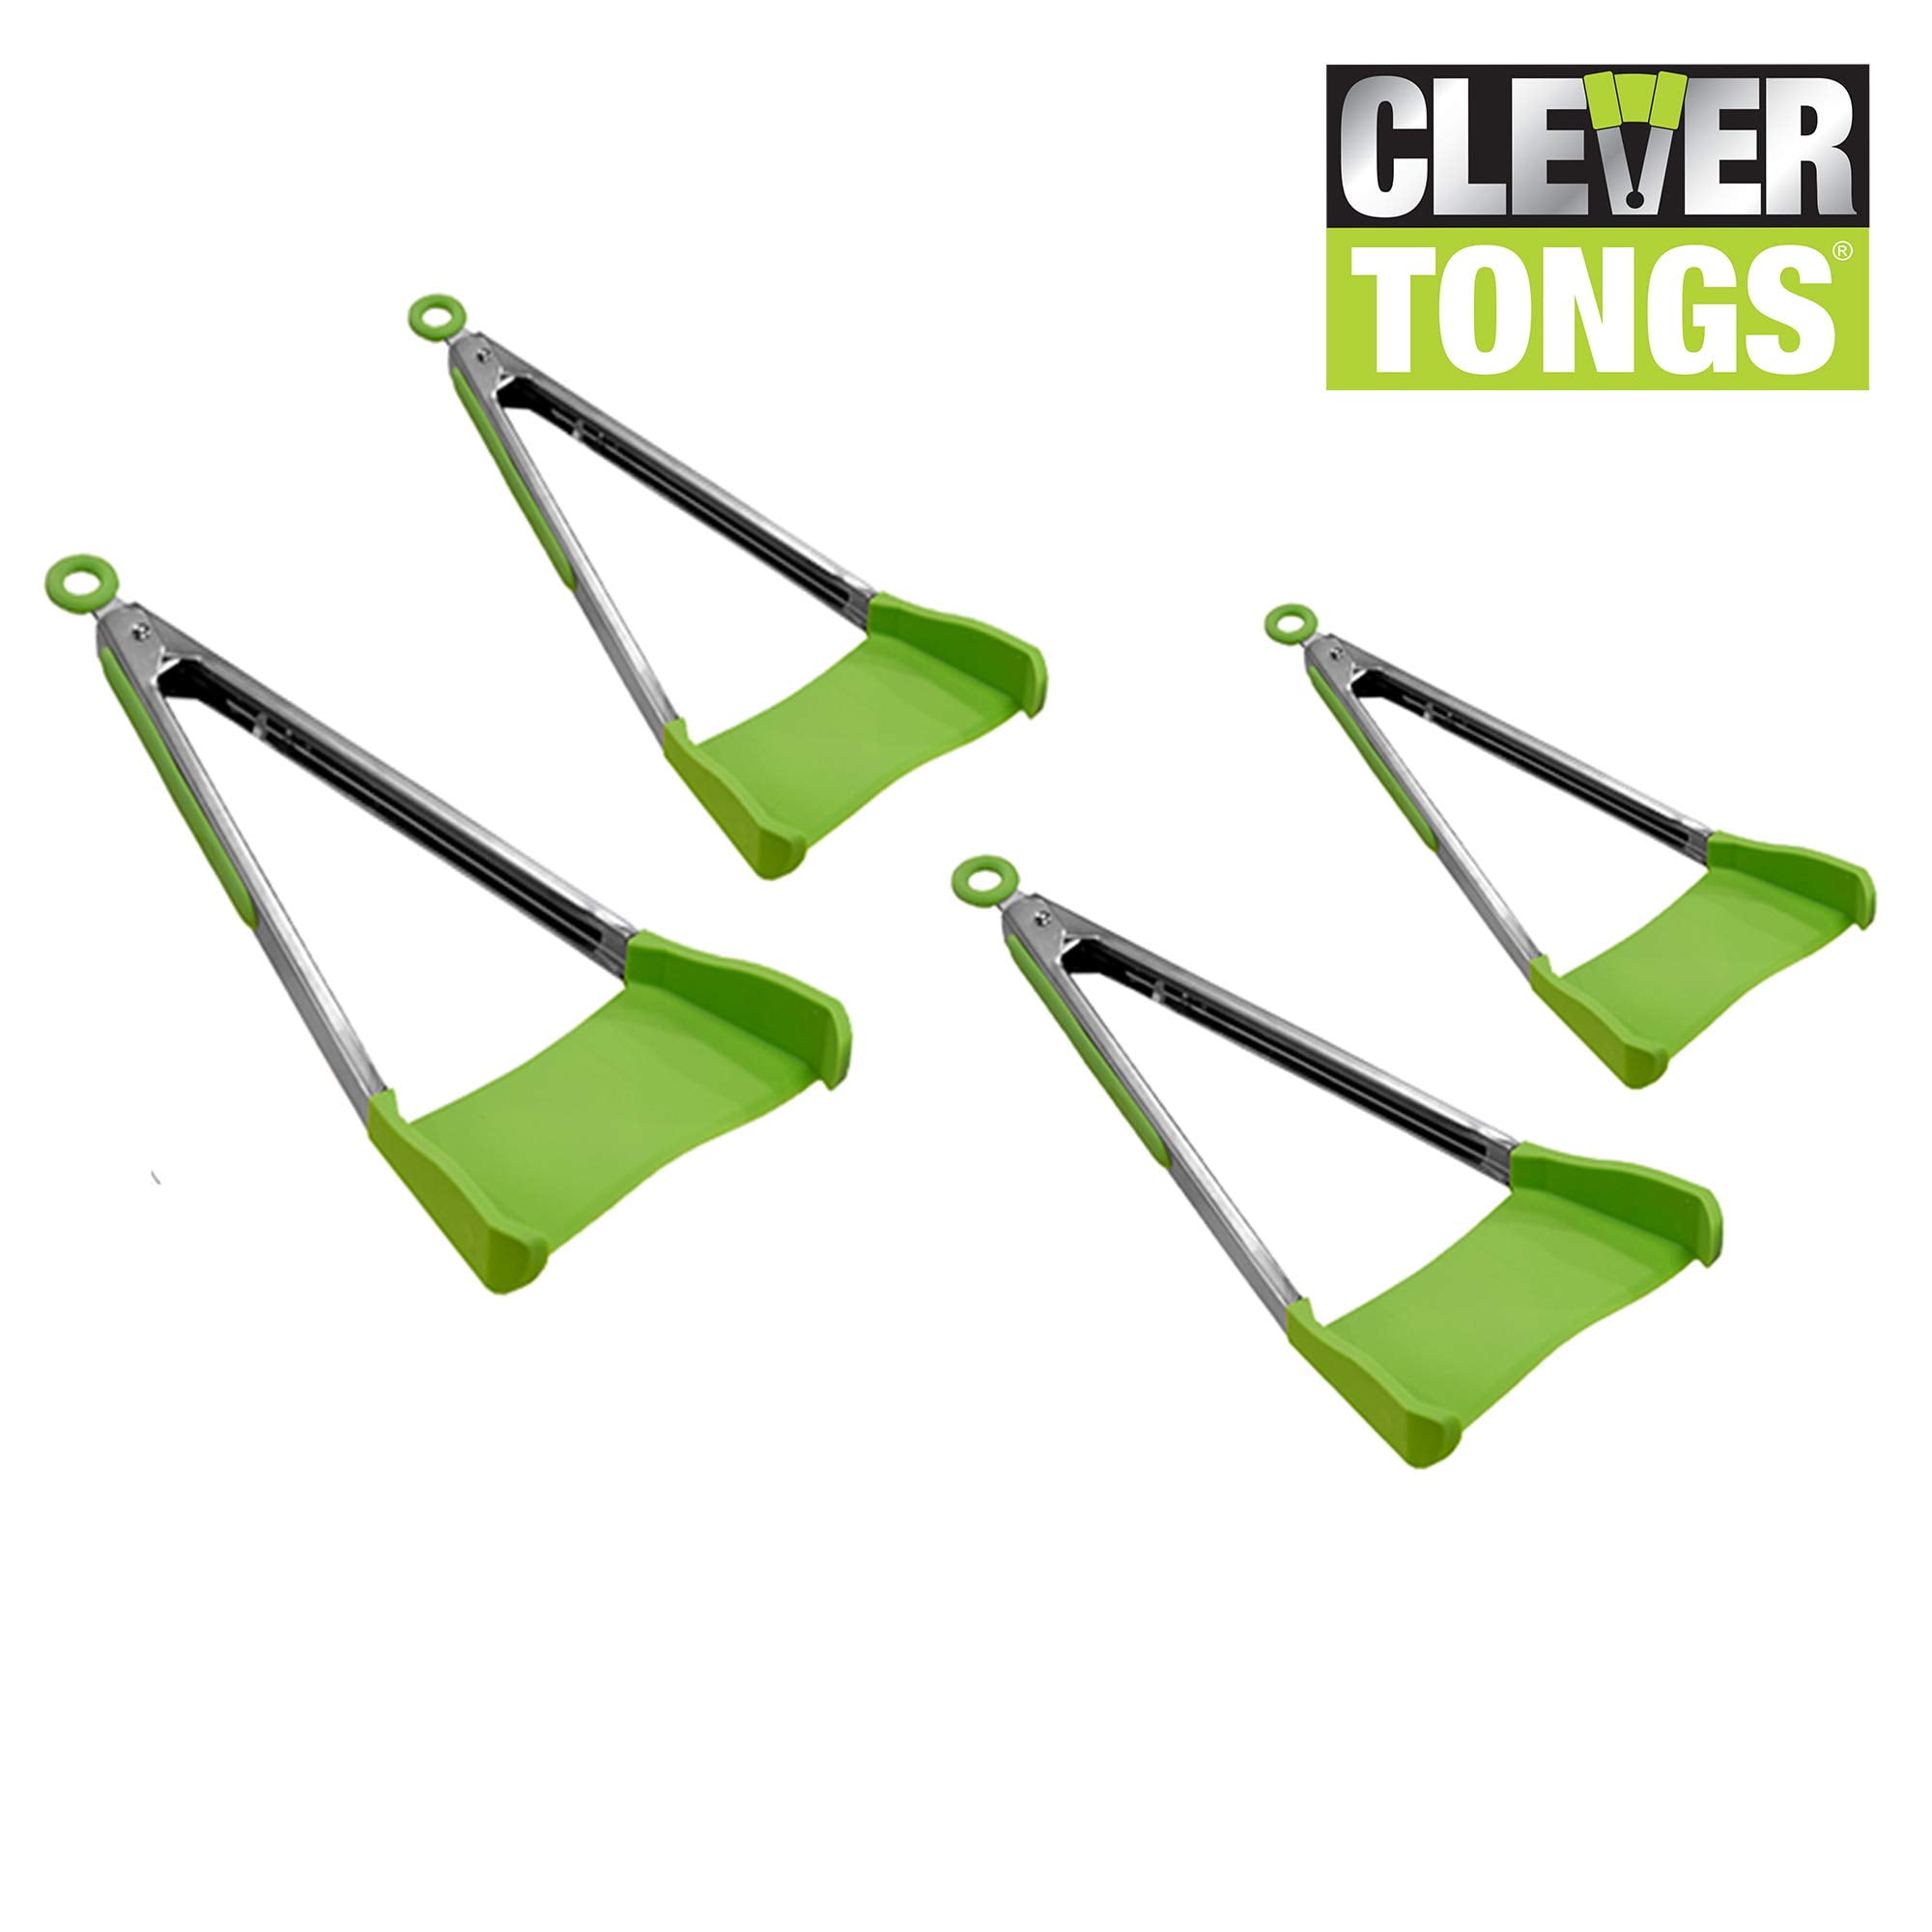  Clever Tongs 2 in 1 Kitchen Spatula & Tongs Non-Stick, Heat  Resistant, Stainless Steel Frame, Silicone & Dishwasher Safe, As Seen on  TV, 4 Pack (Includes 2 Large & 2 Small)